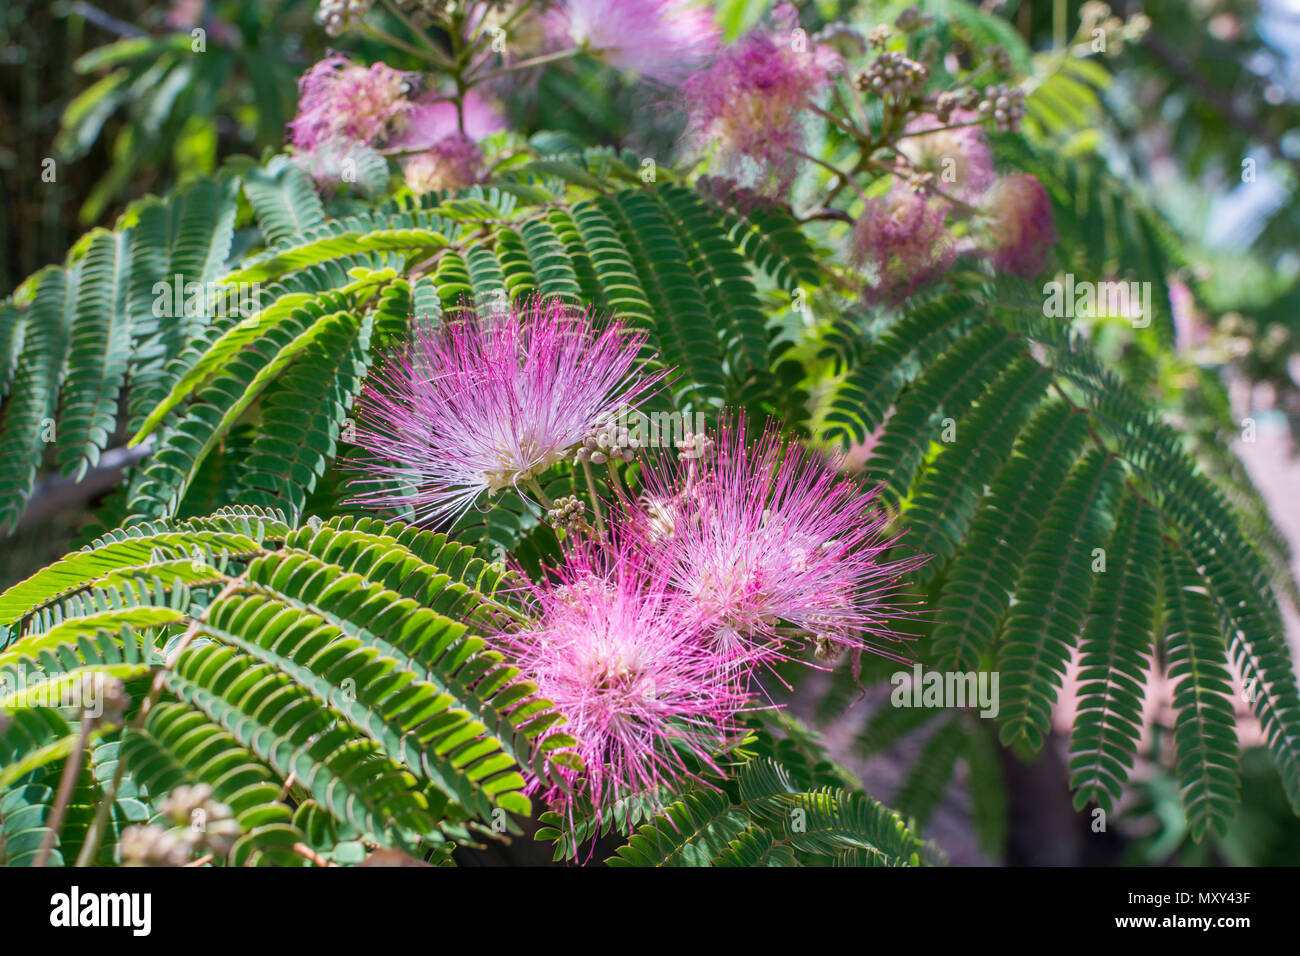 Albizia julibrissin, mimosa tree with pink blooms in the southwestern United States. Stock Photo